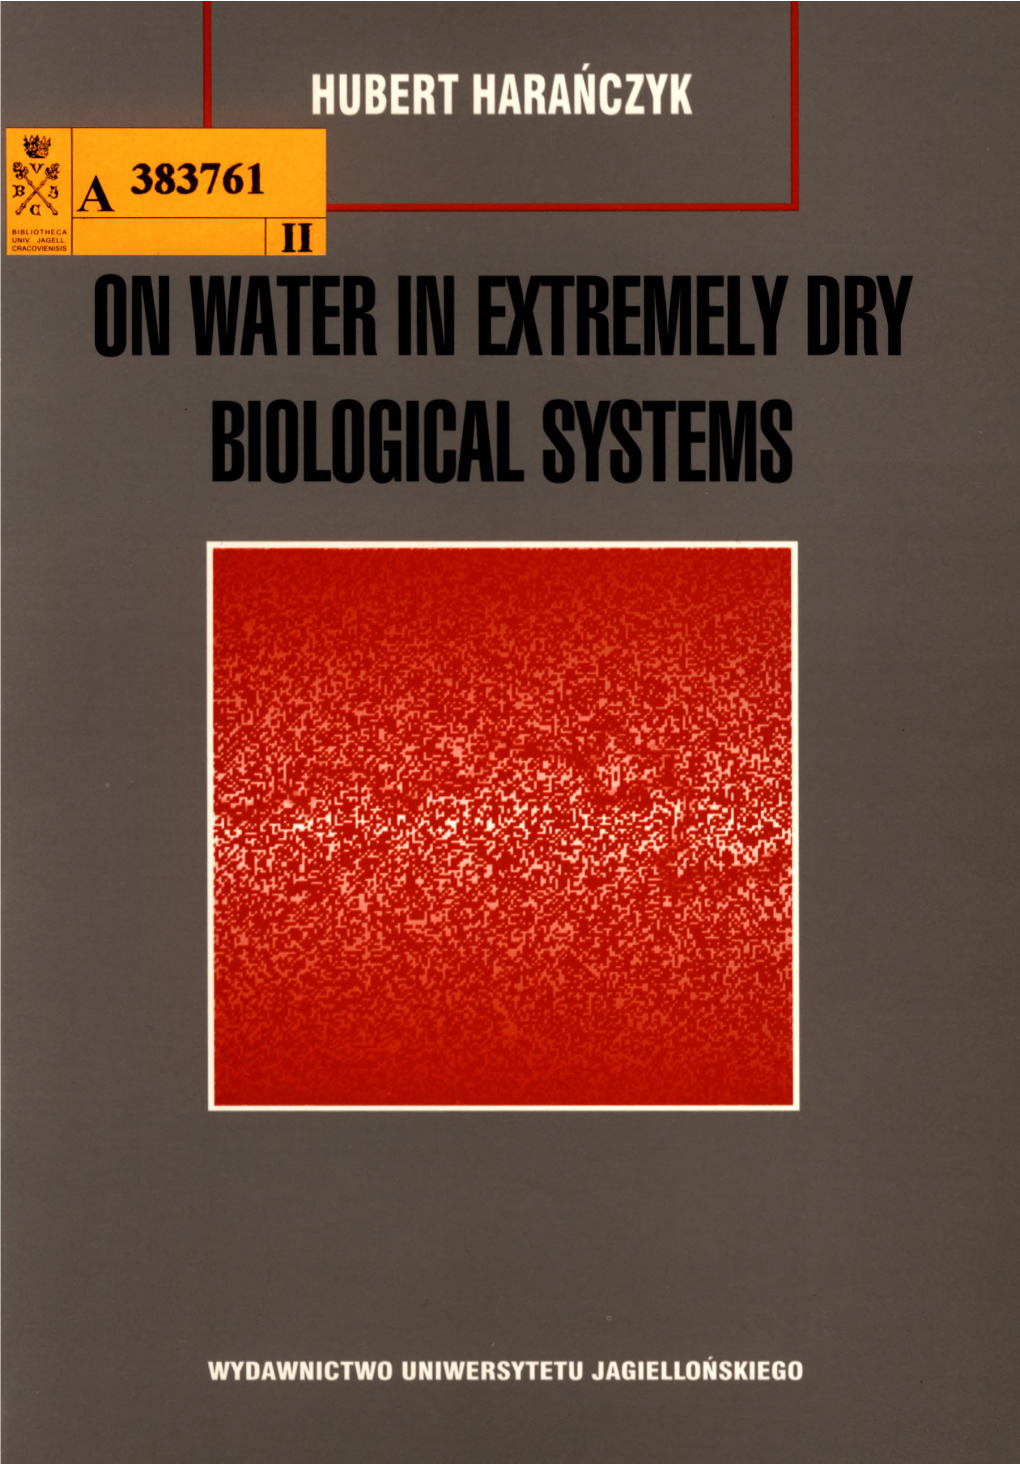 On Water in Extremely Dry Biological Systems